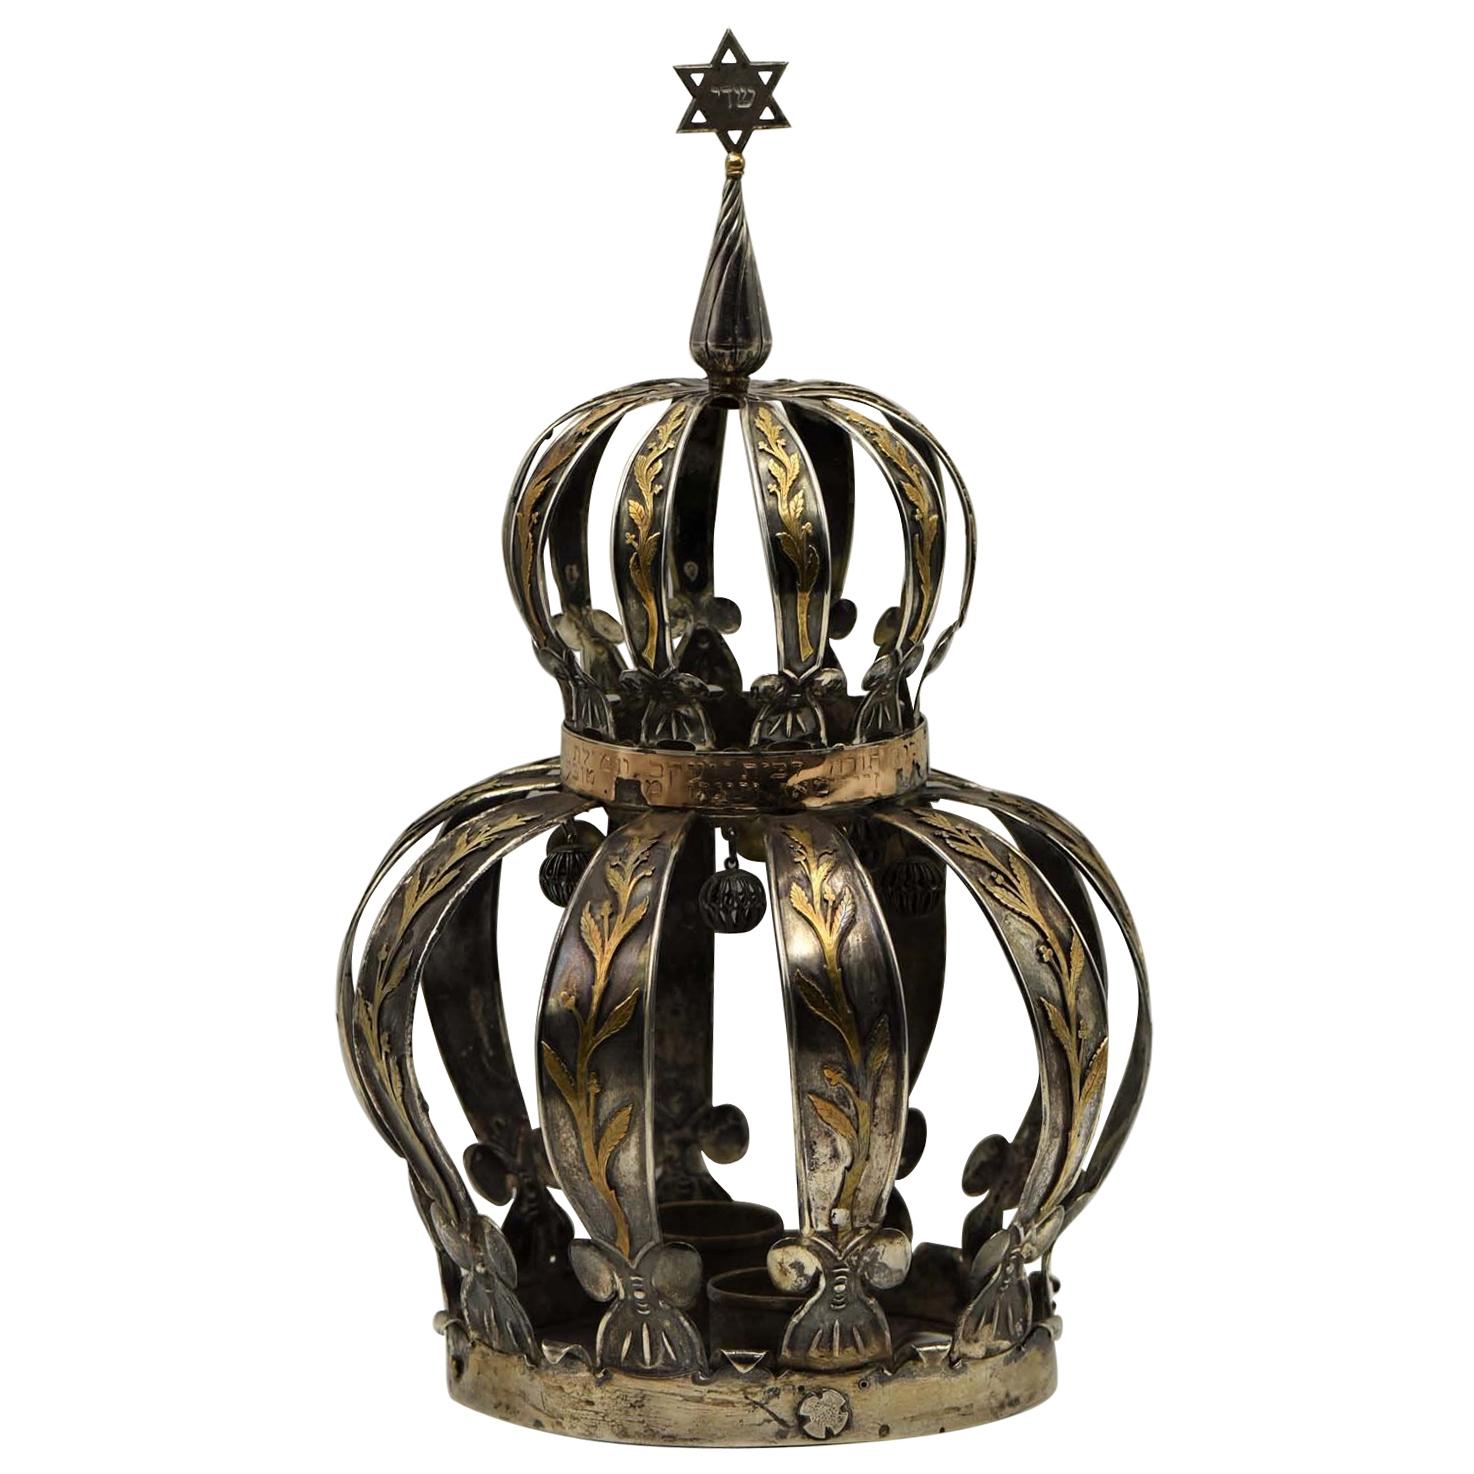 Early 20th Century Argentinian Silver and Gold Torah Crown